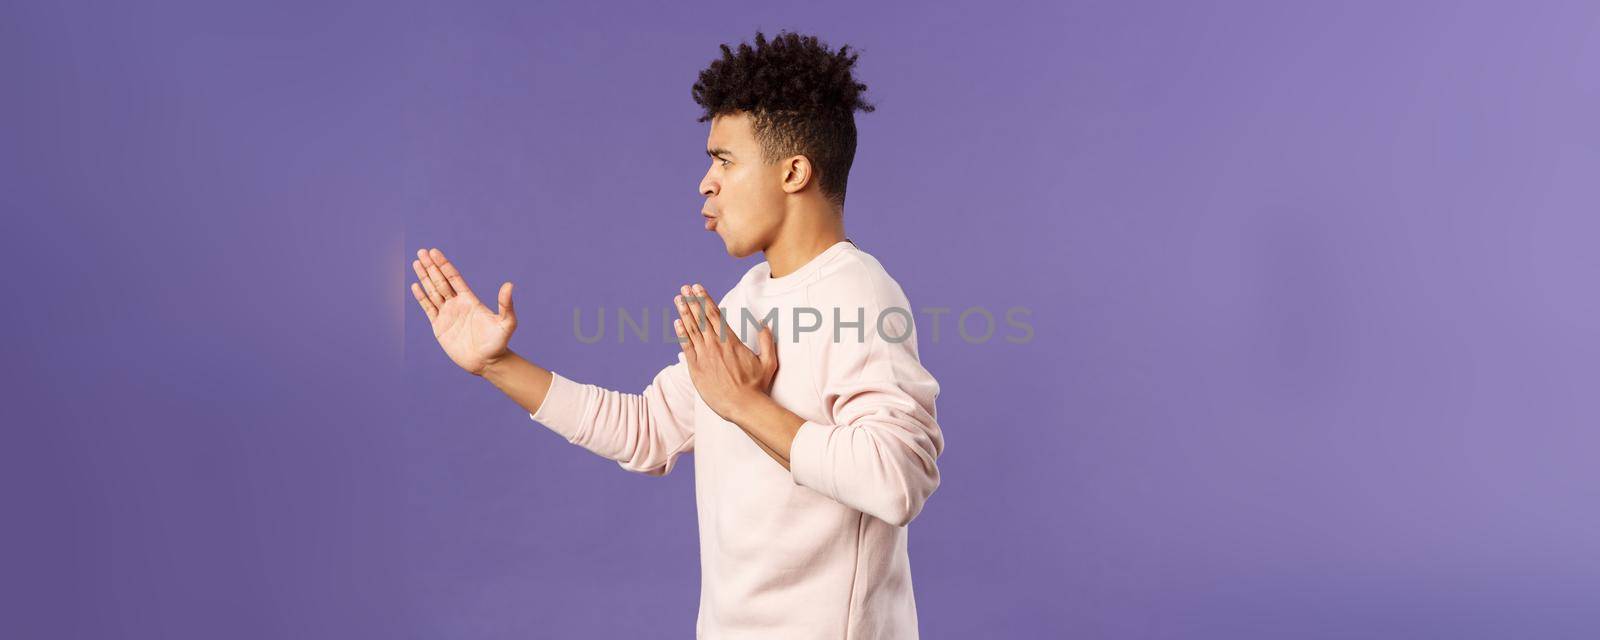 Profile portrait of young hispanic guy with dreads acting like he is ninja or martial arts fighter, practice his kung-fu or taekwondo skills, standing purple background by Benzoix